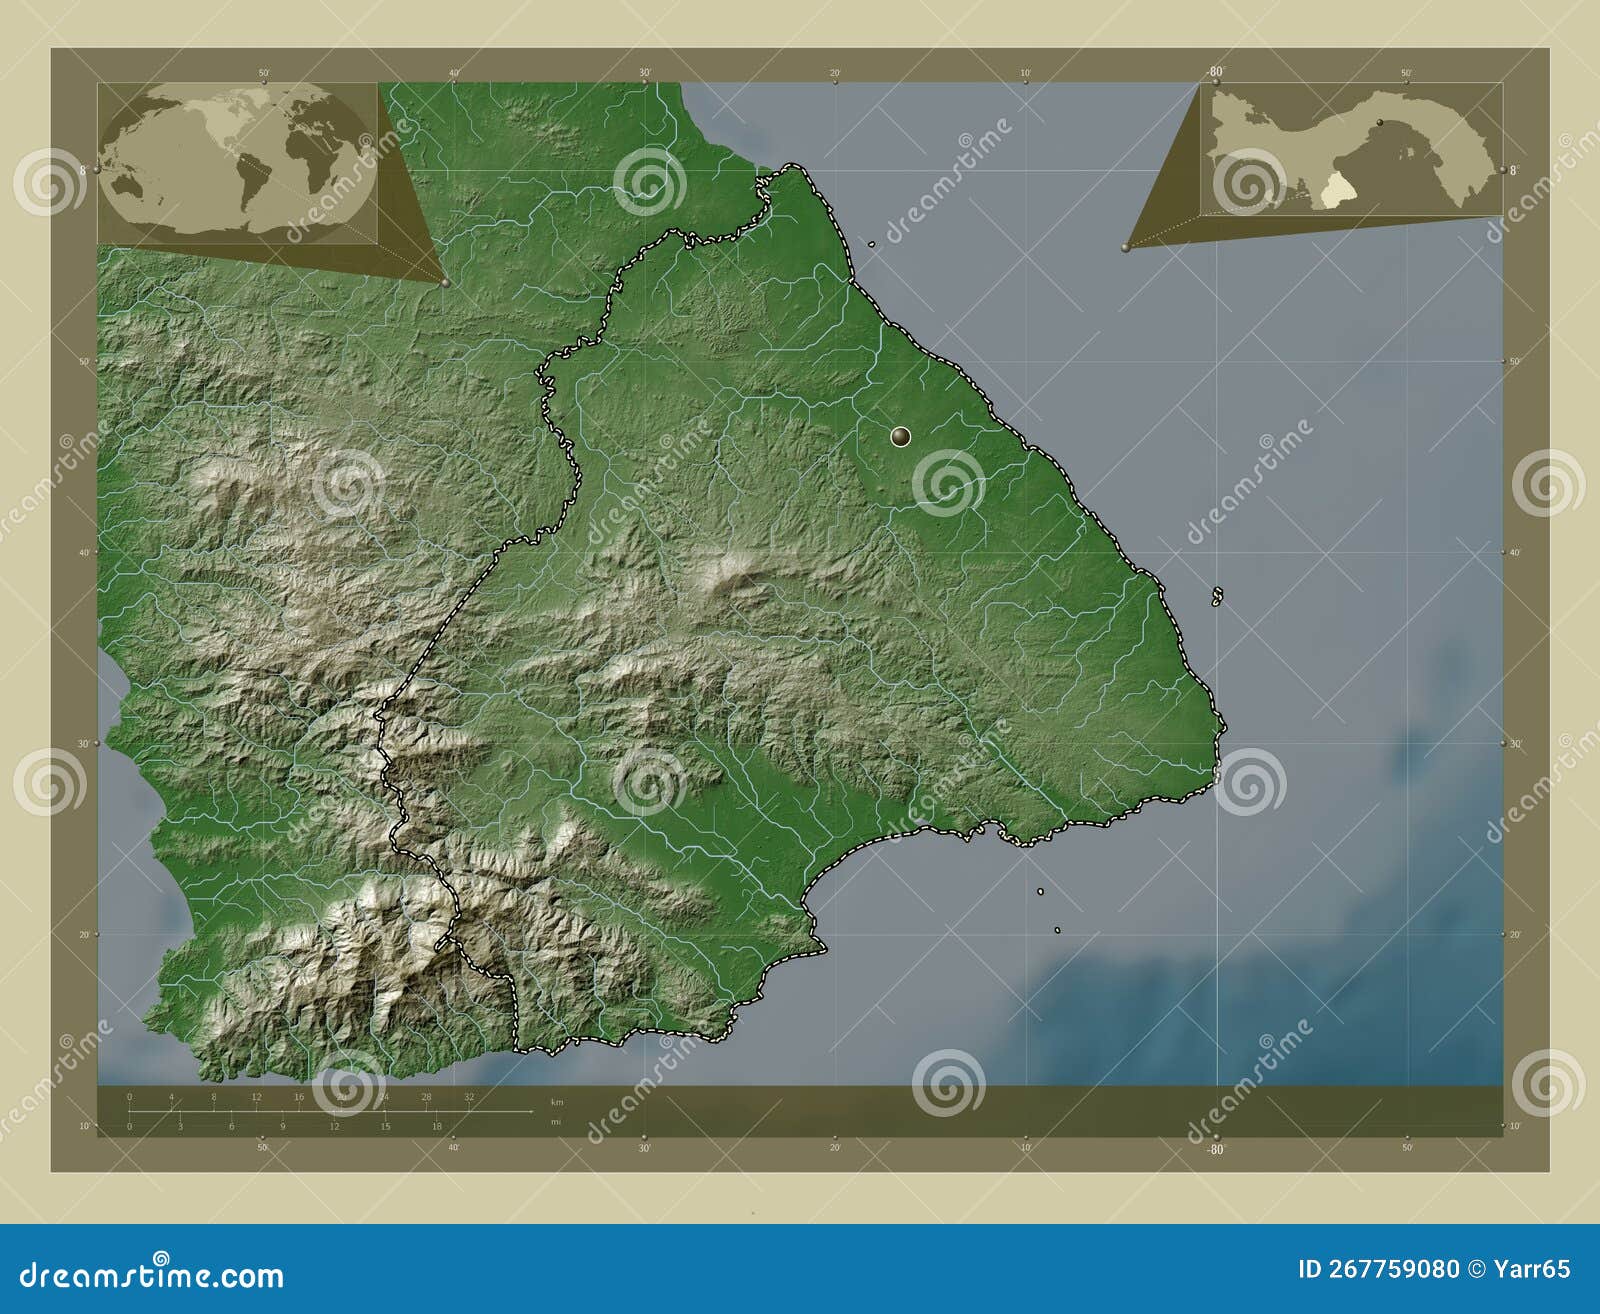 Map Of Los Santos. Panama. 3d Stock Photo, Picture and Royalty